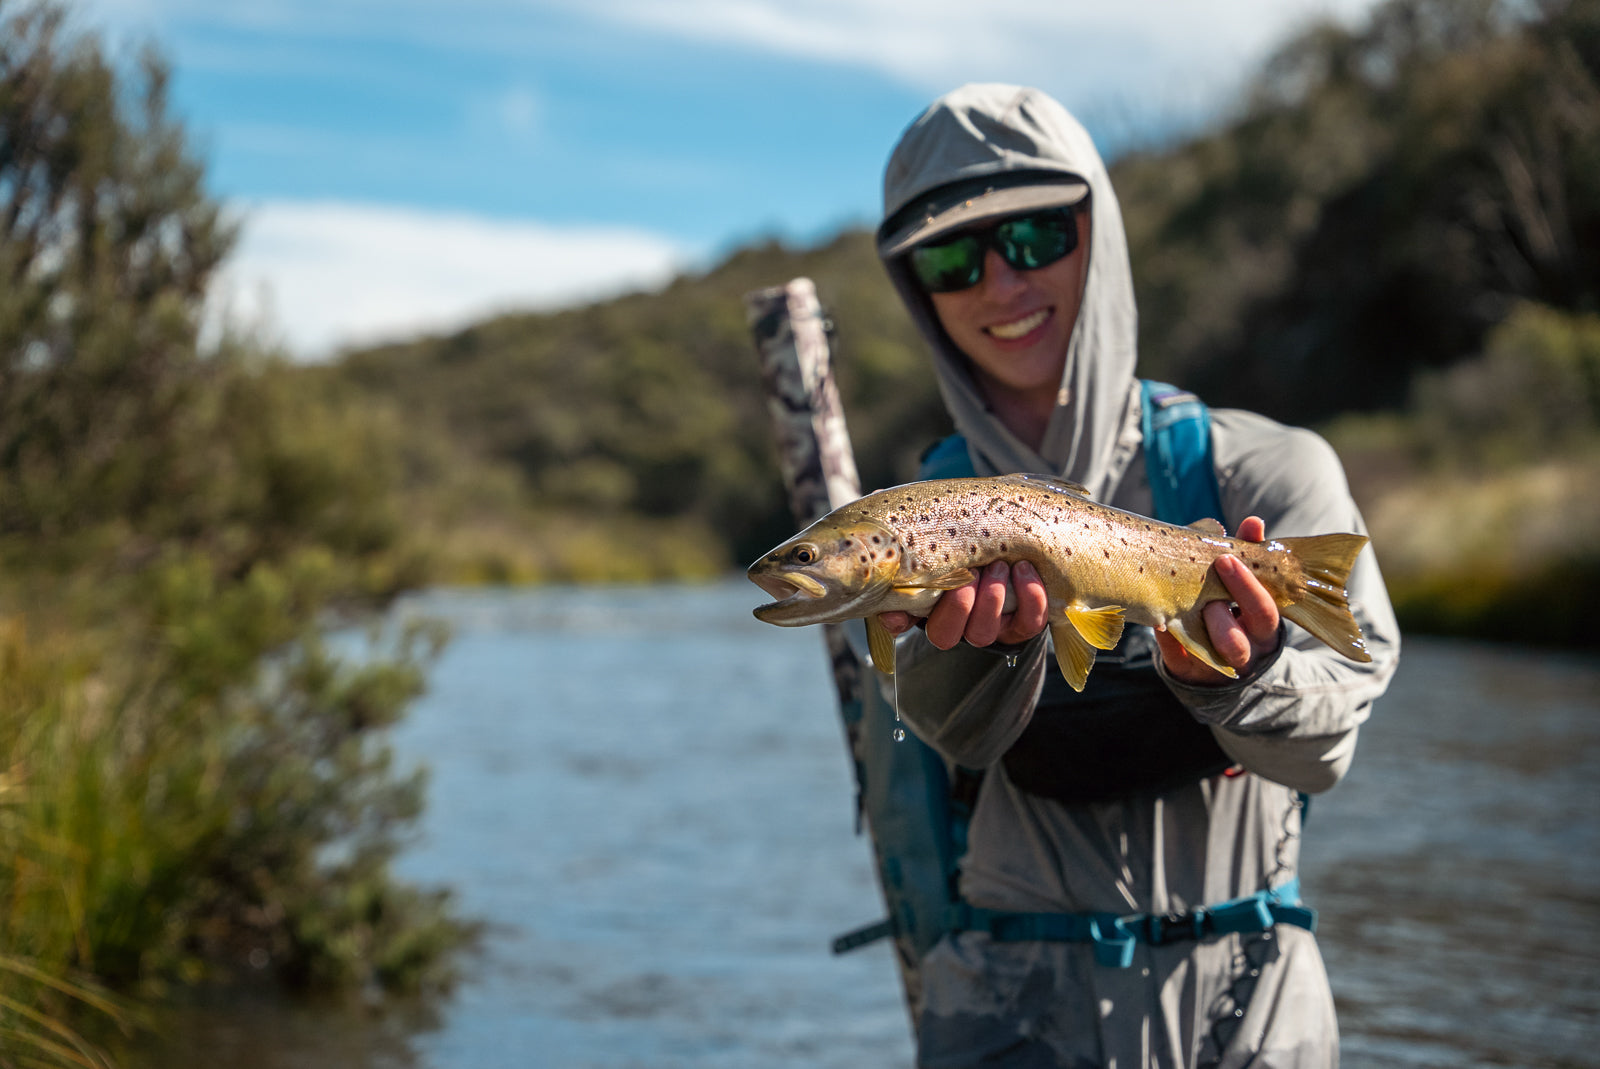 Pay Ryan holding a snowy mountains brown trout caught while fly fishing near Hains Hut in Kosciuszko National Park